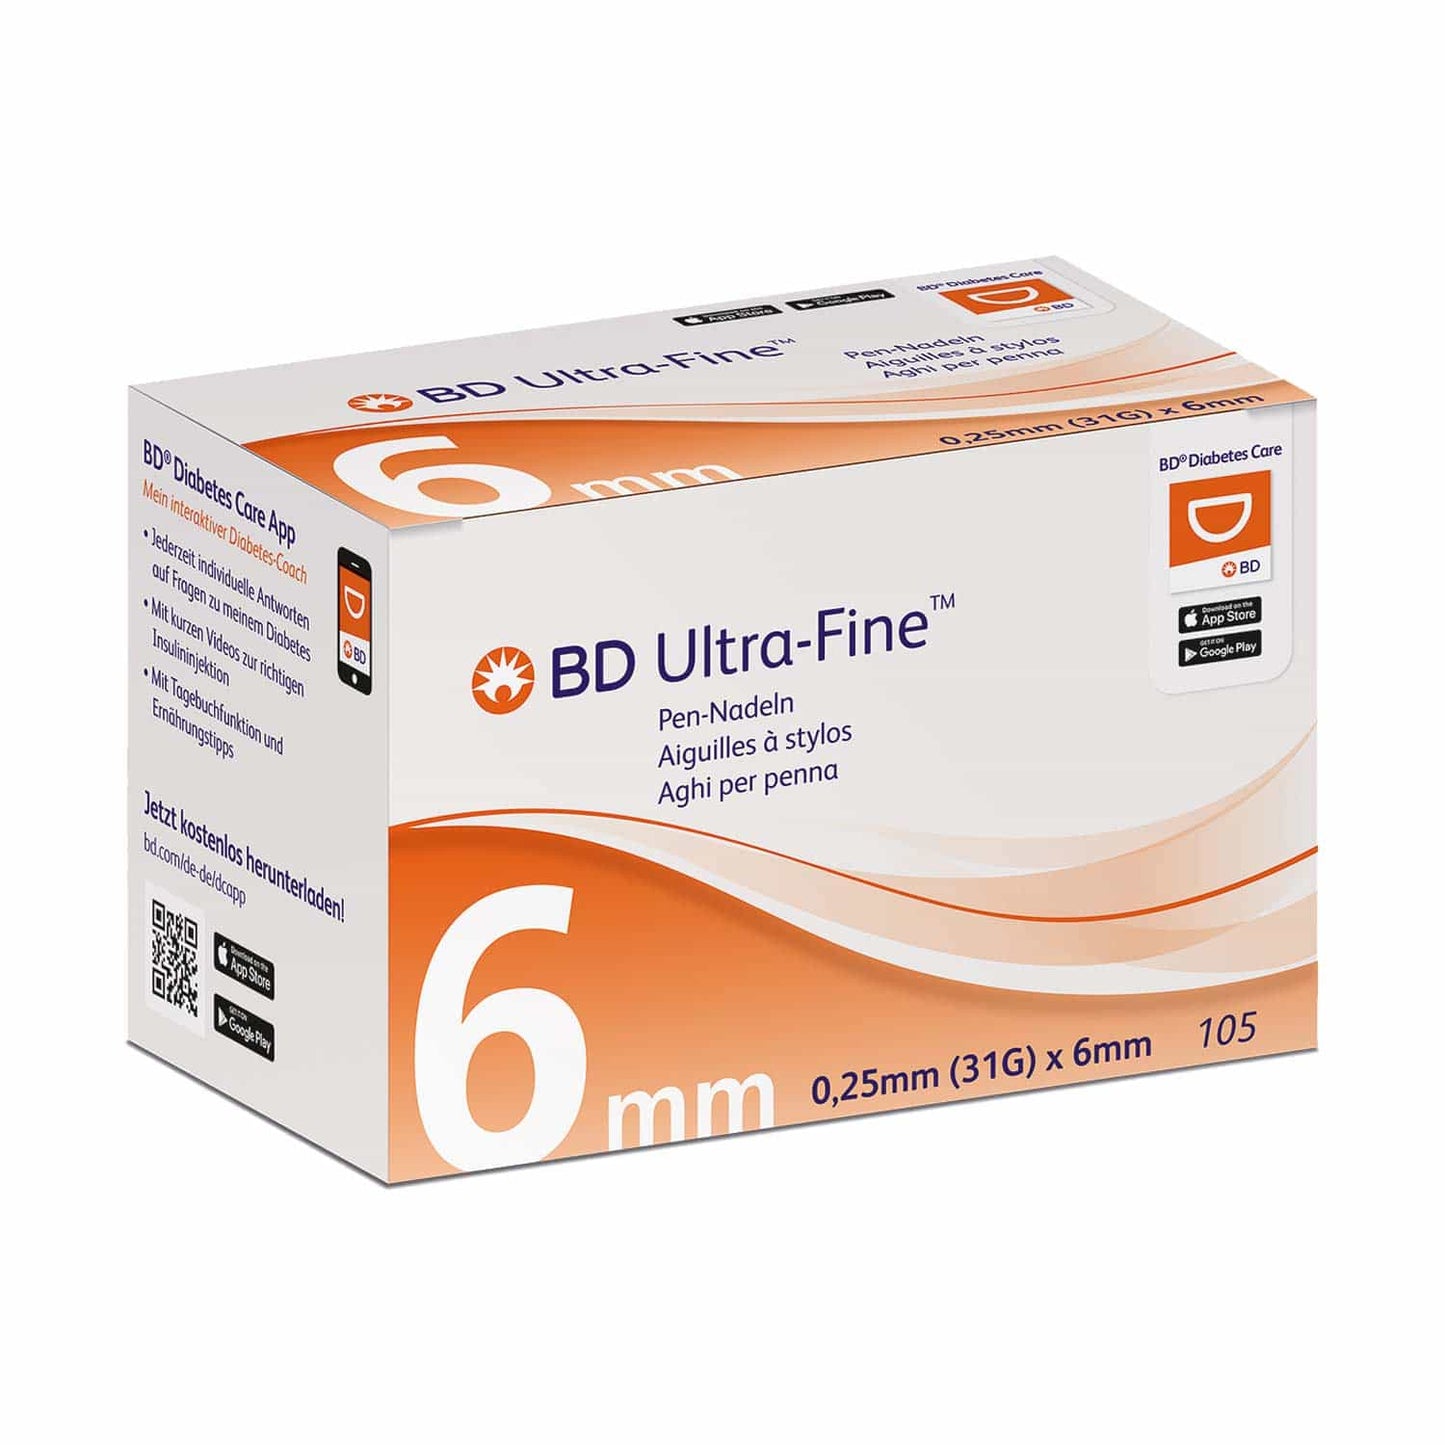 Bd Ultra-Fine 5 Mm Pen Needles With Special 5-Fold Cut